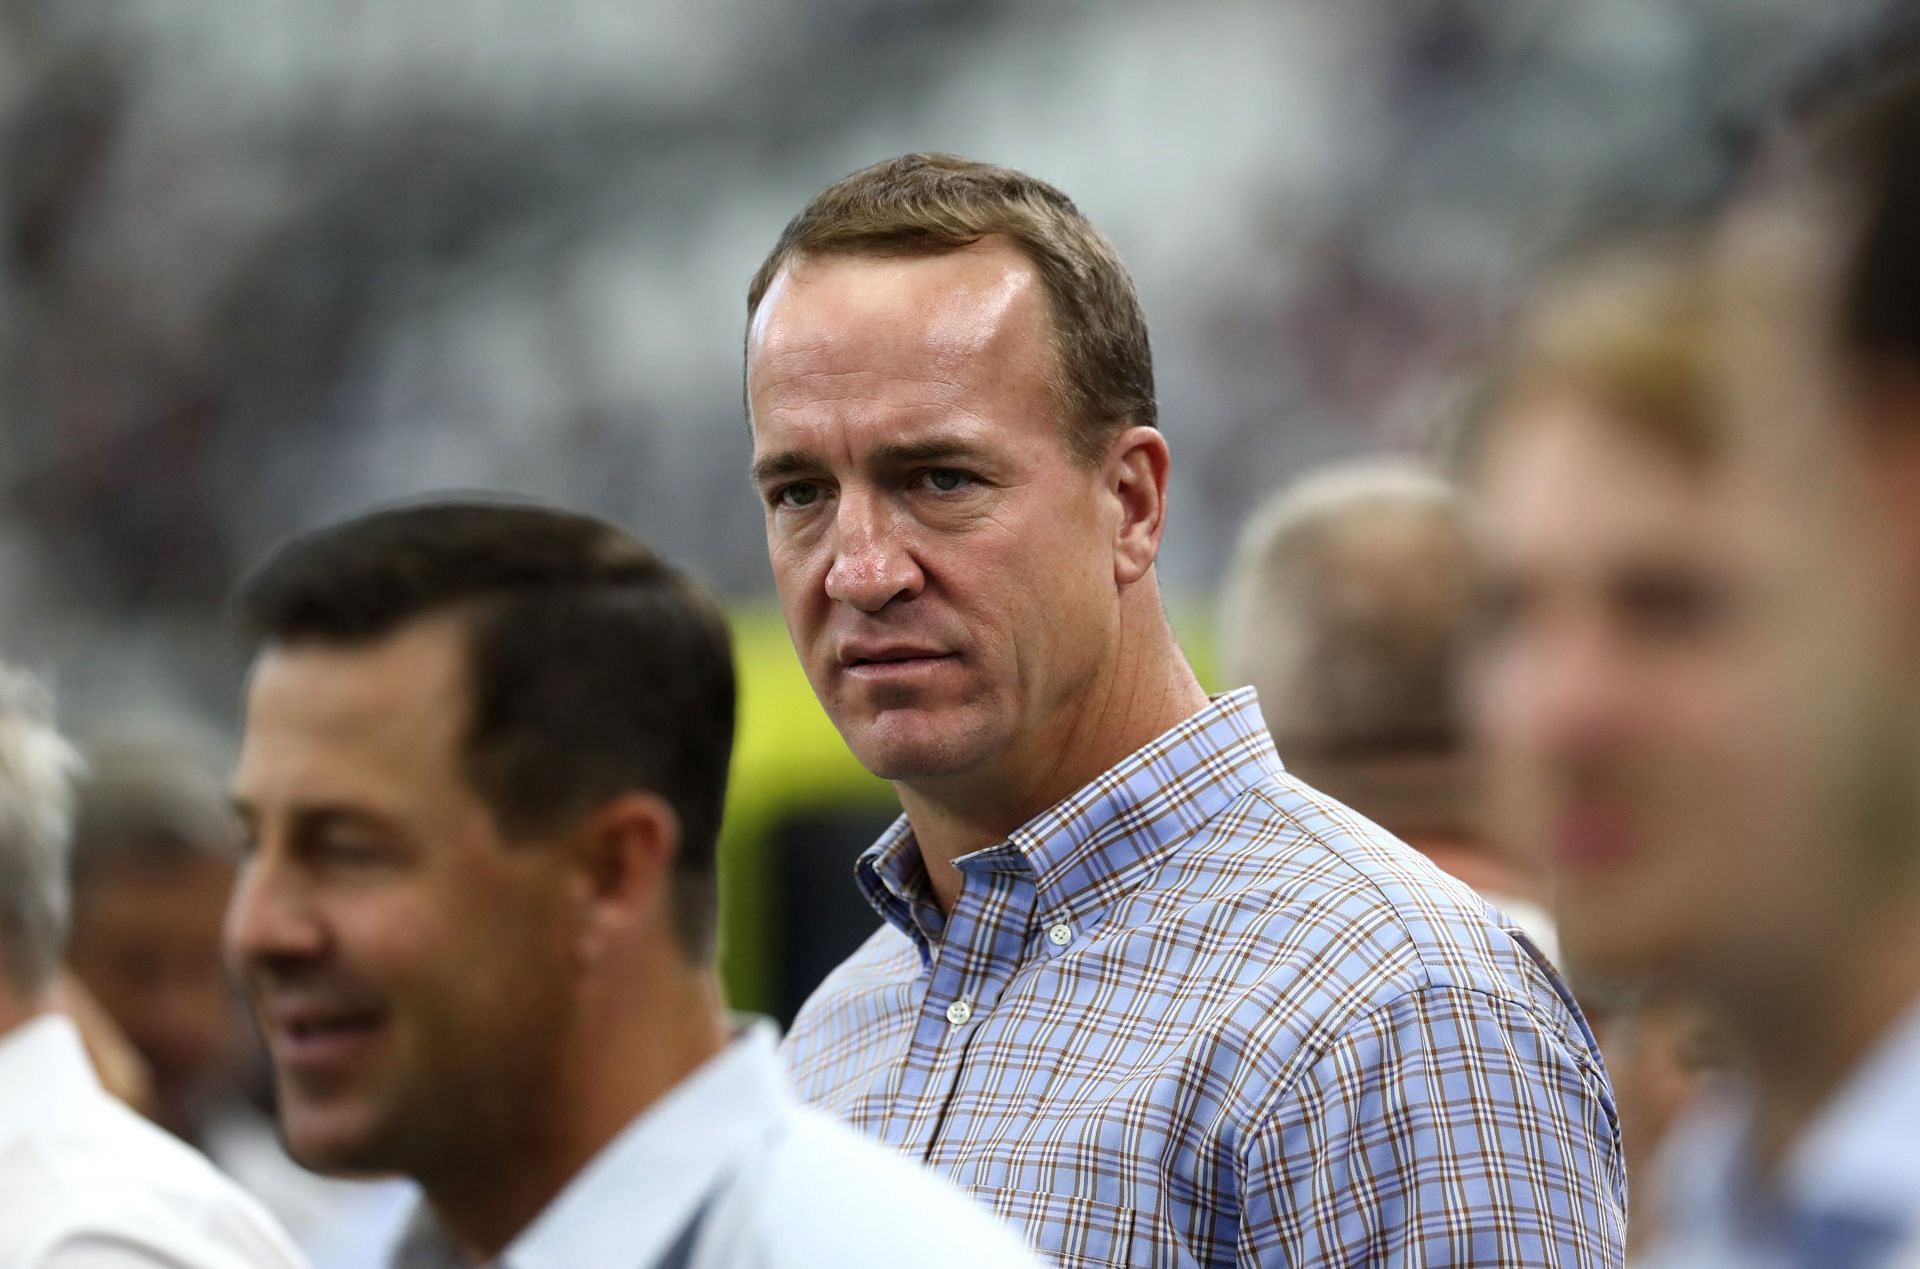 Revisiting troubling sexual assault allegation levied against NFL Hall of Famer Peyton Manning